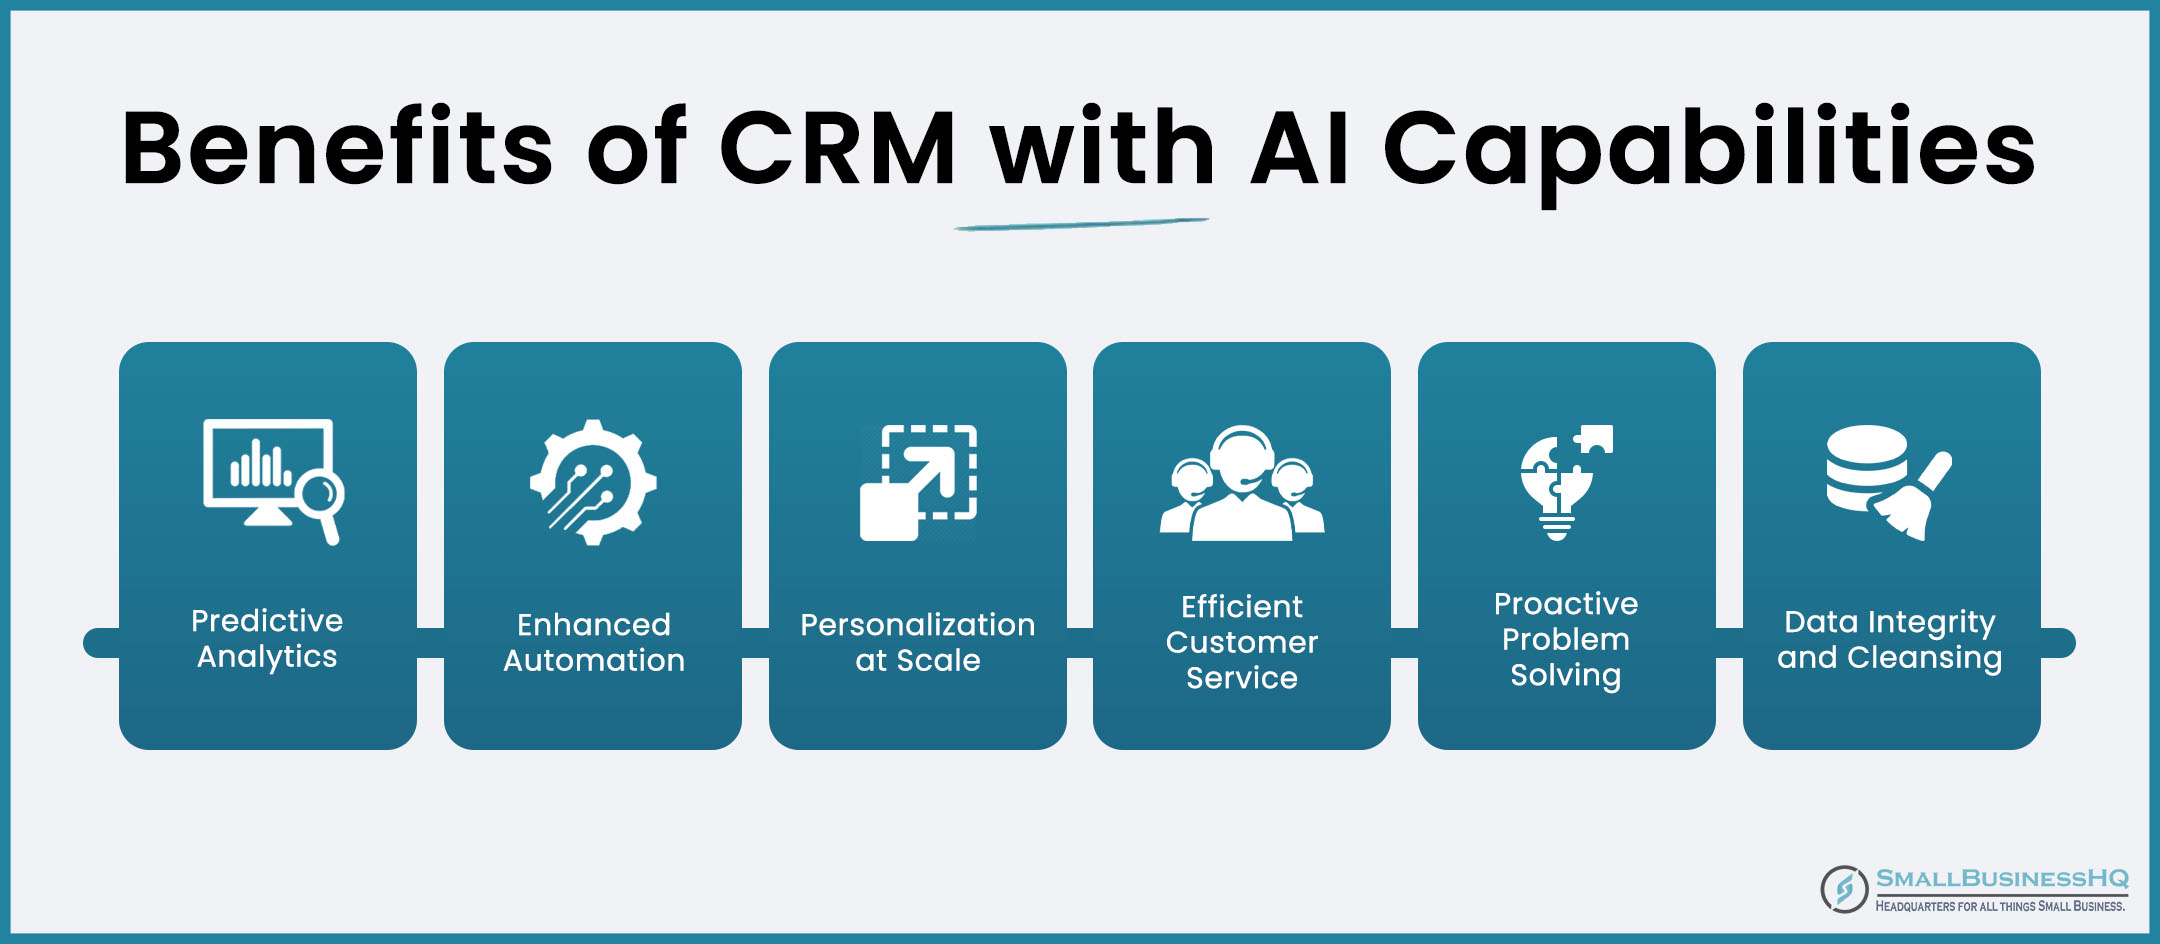 Benefits of CRM with AI Capabilities